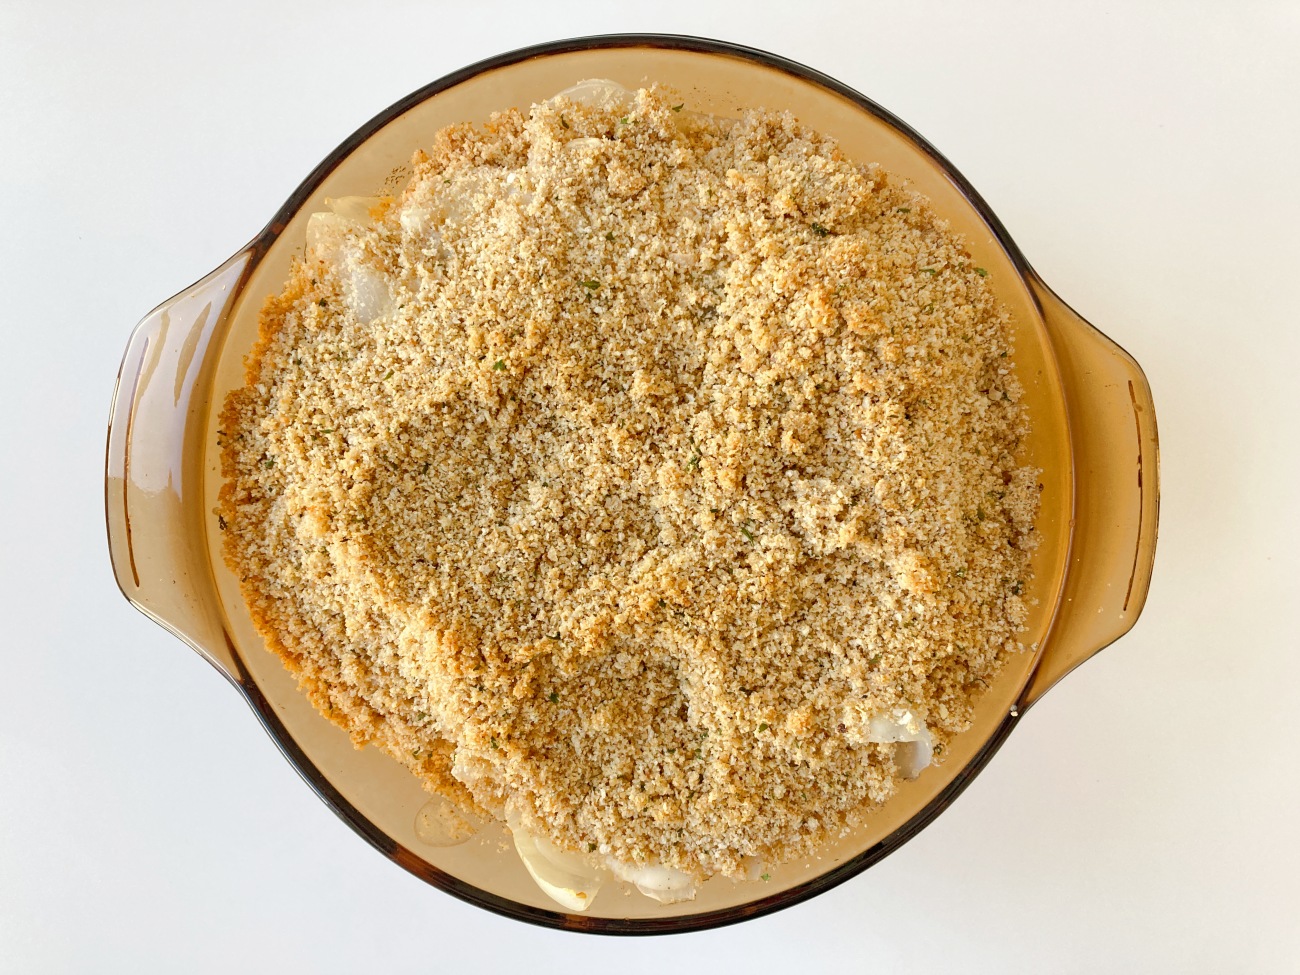 Melt remaining butter and toss with breadcrumbs. Spread this over top of casserole. Bake for 20 minutes or until breadcrumbs are golden brown.